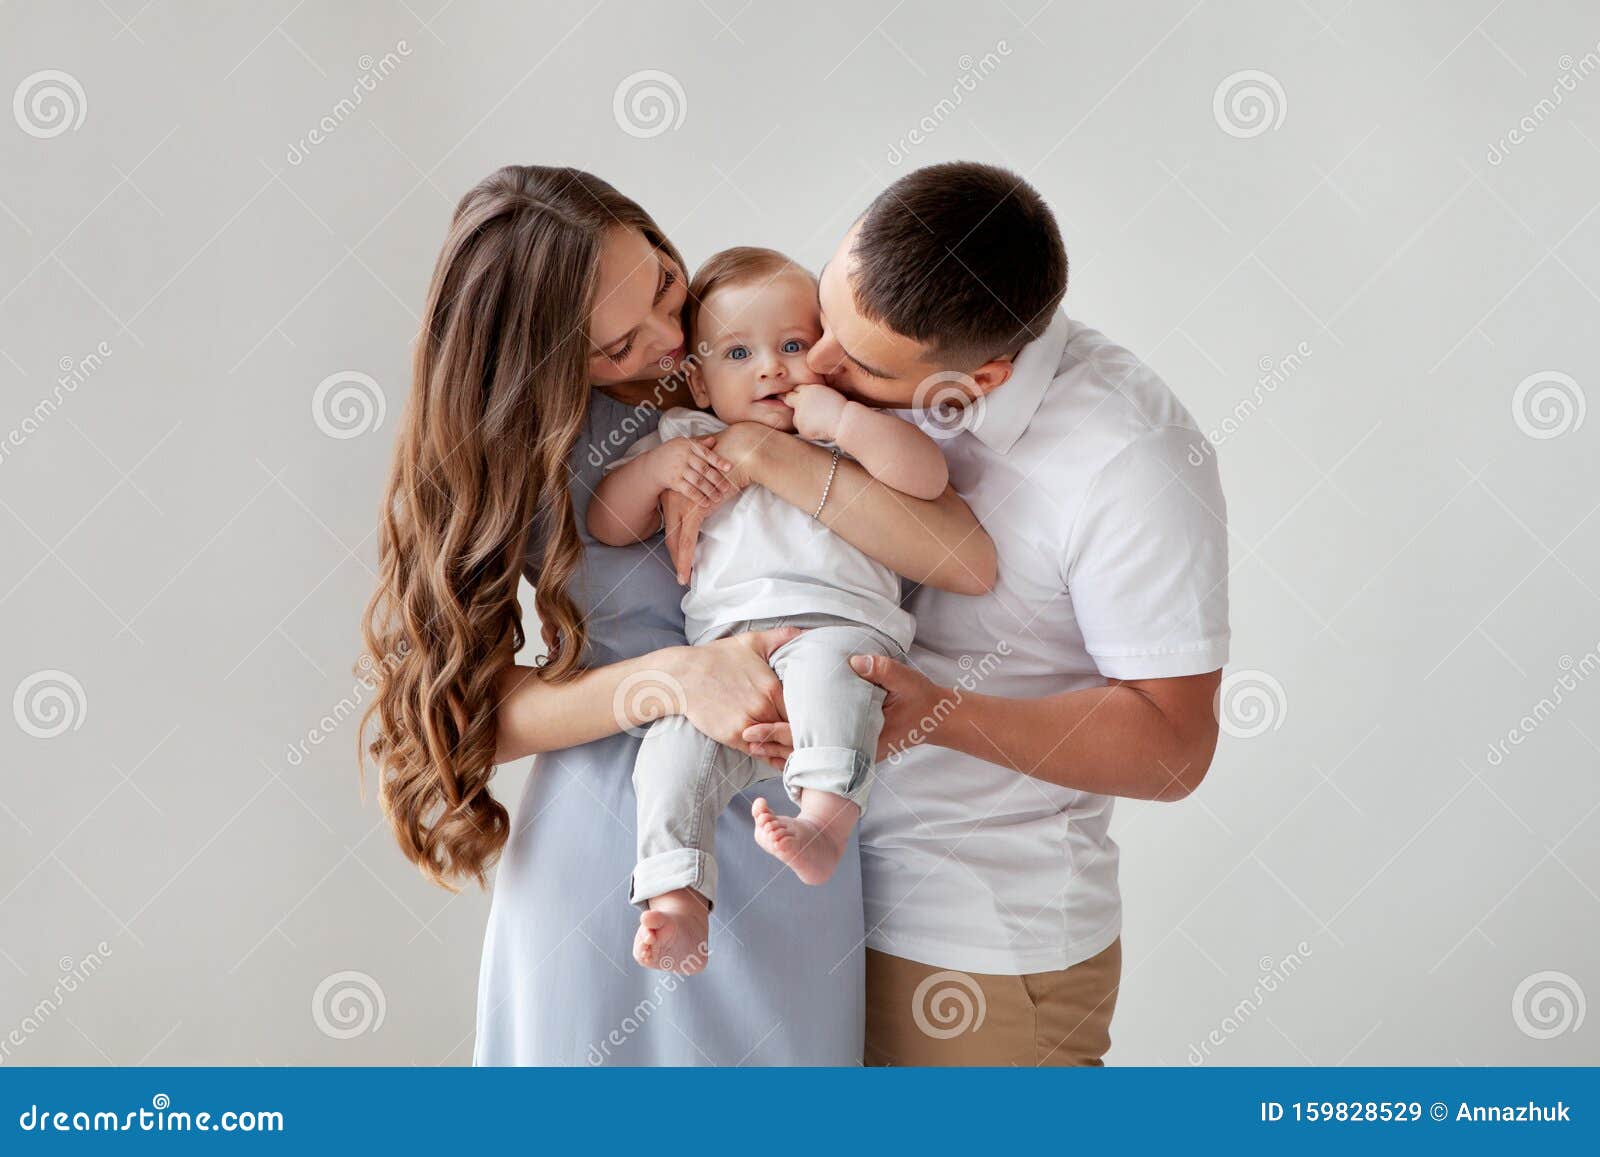 Happy Young Family. Beautiful Mother and Father Kissing Their Baby ...